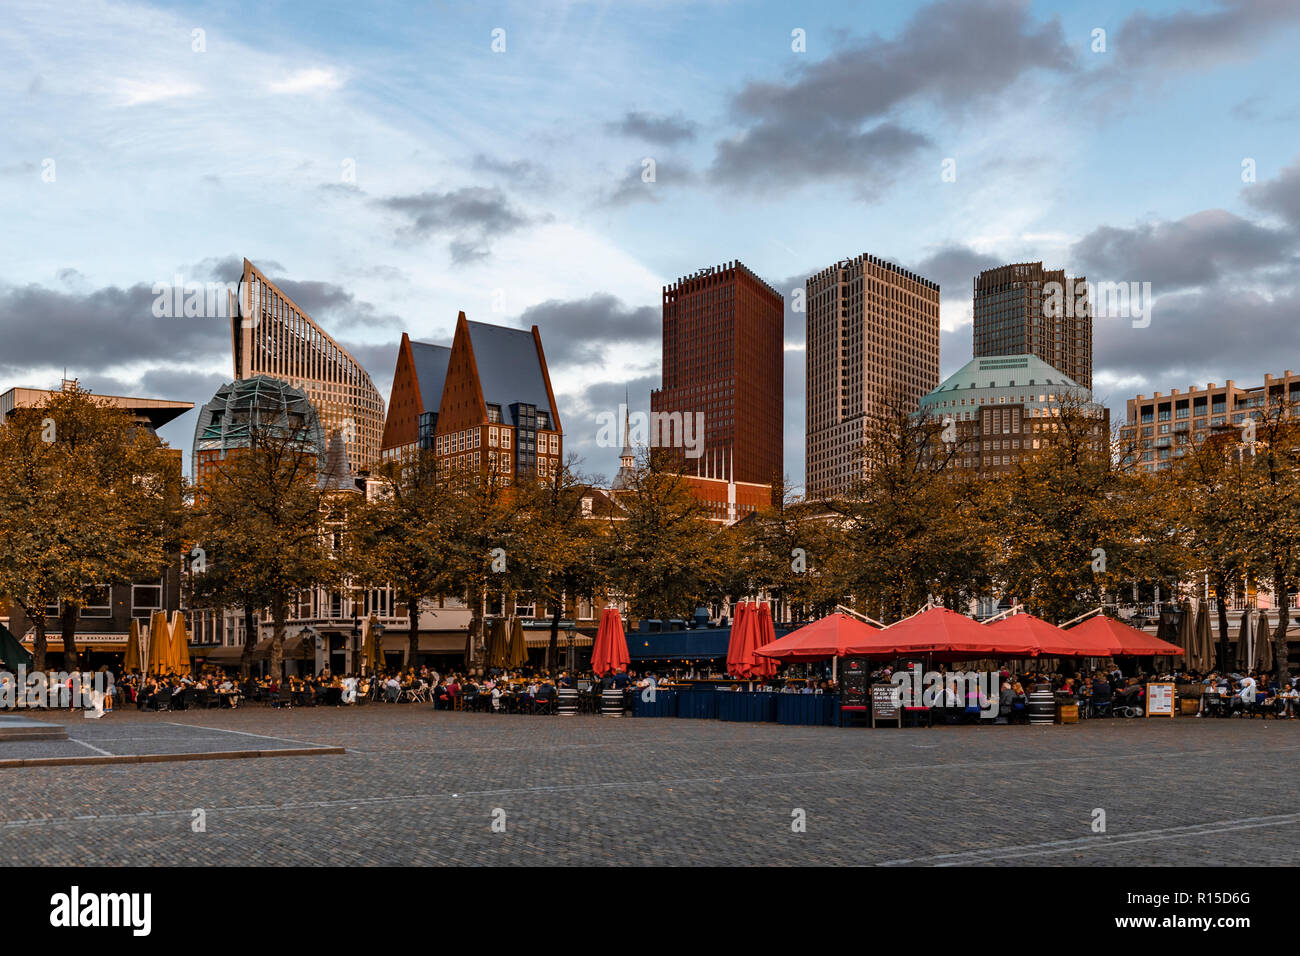 THE HAGUE, 12 October 2018 - City center, Spui place with restaurants and their terraces filled with people getting dink or dinner at the autumnal sun Stock Photo